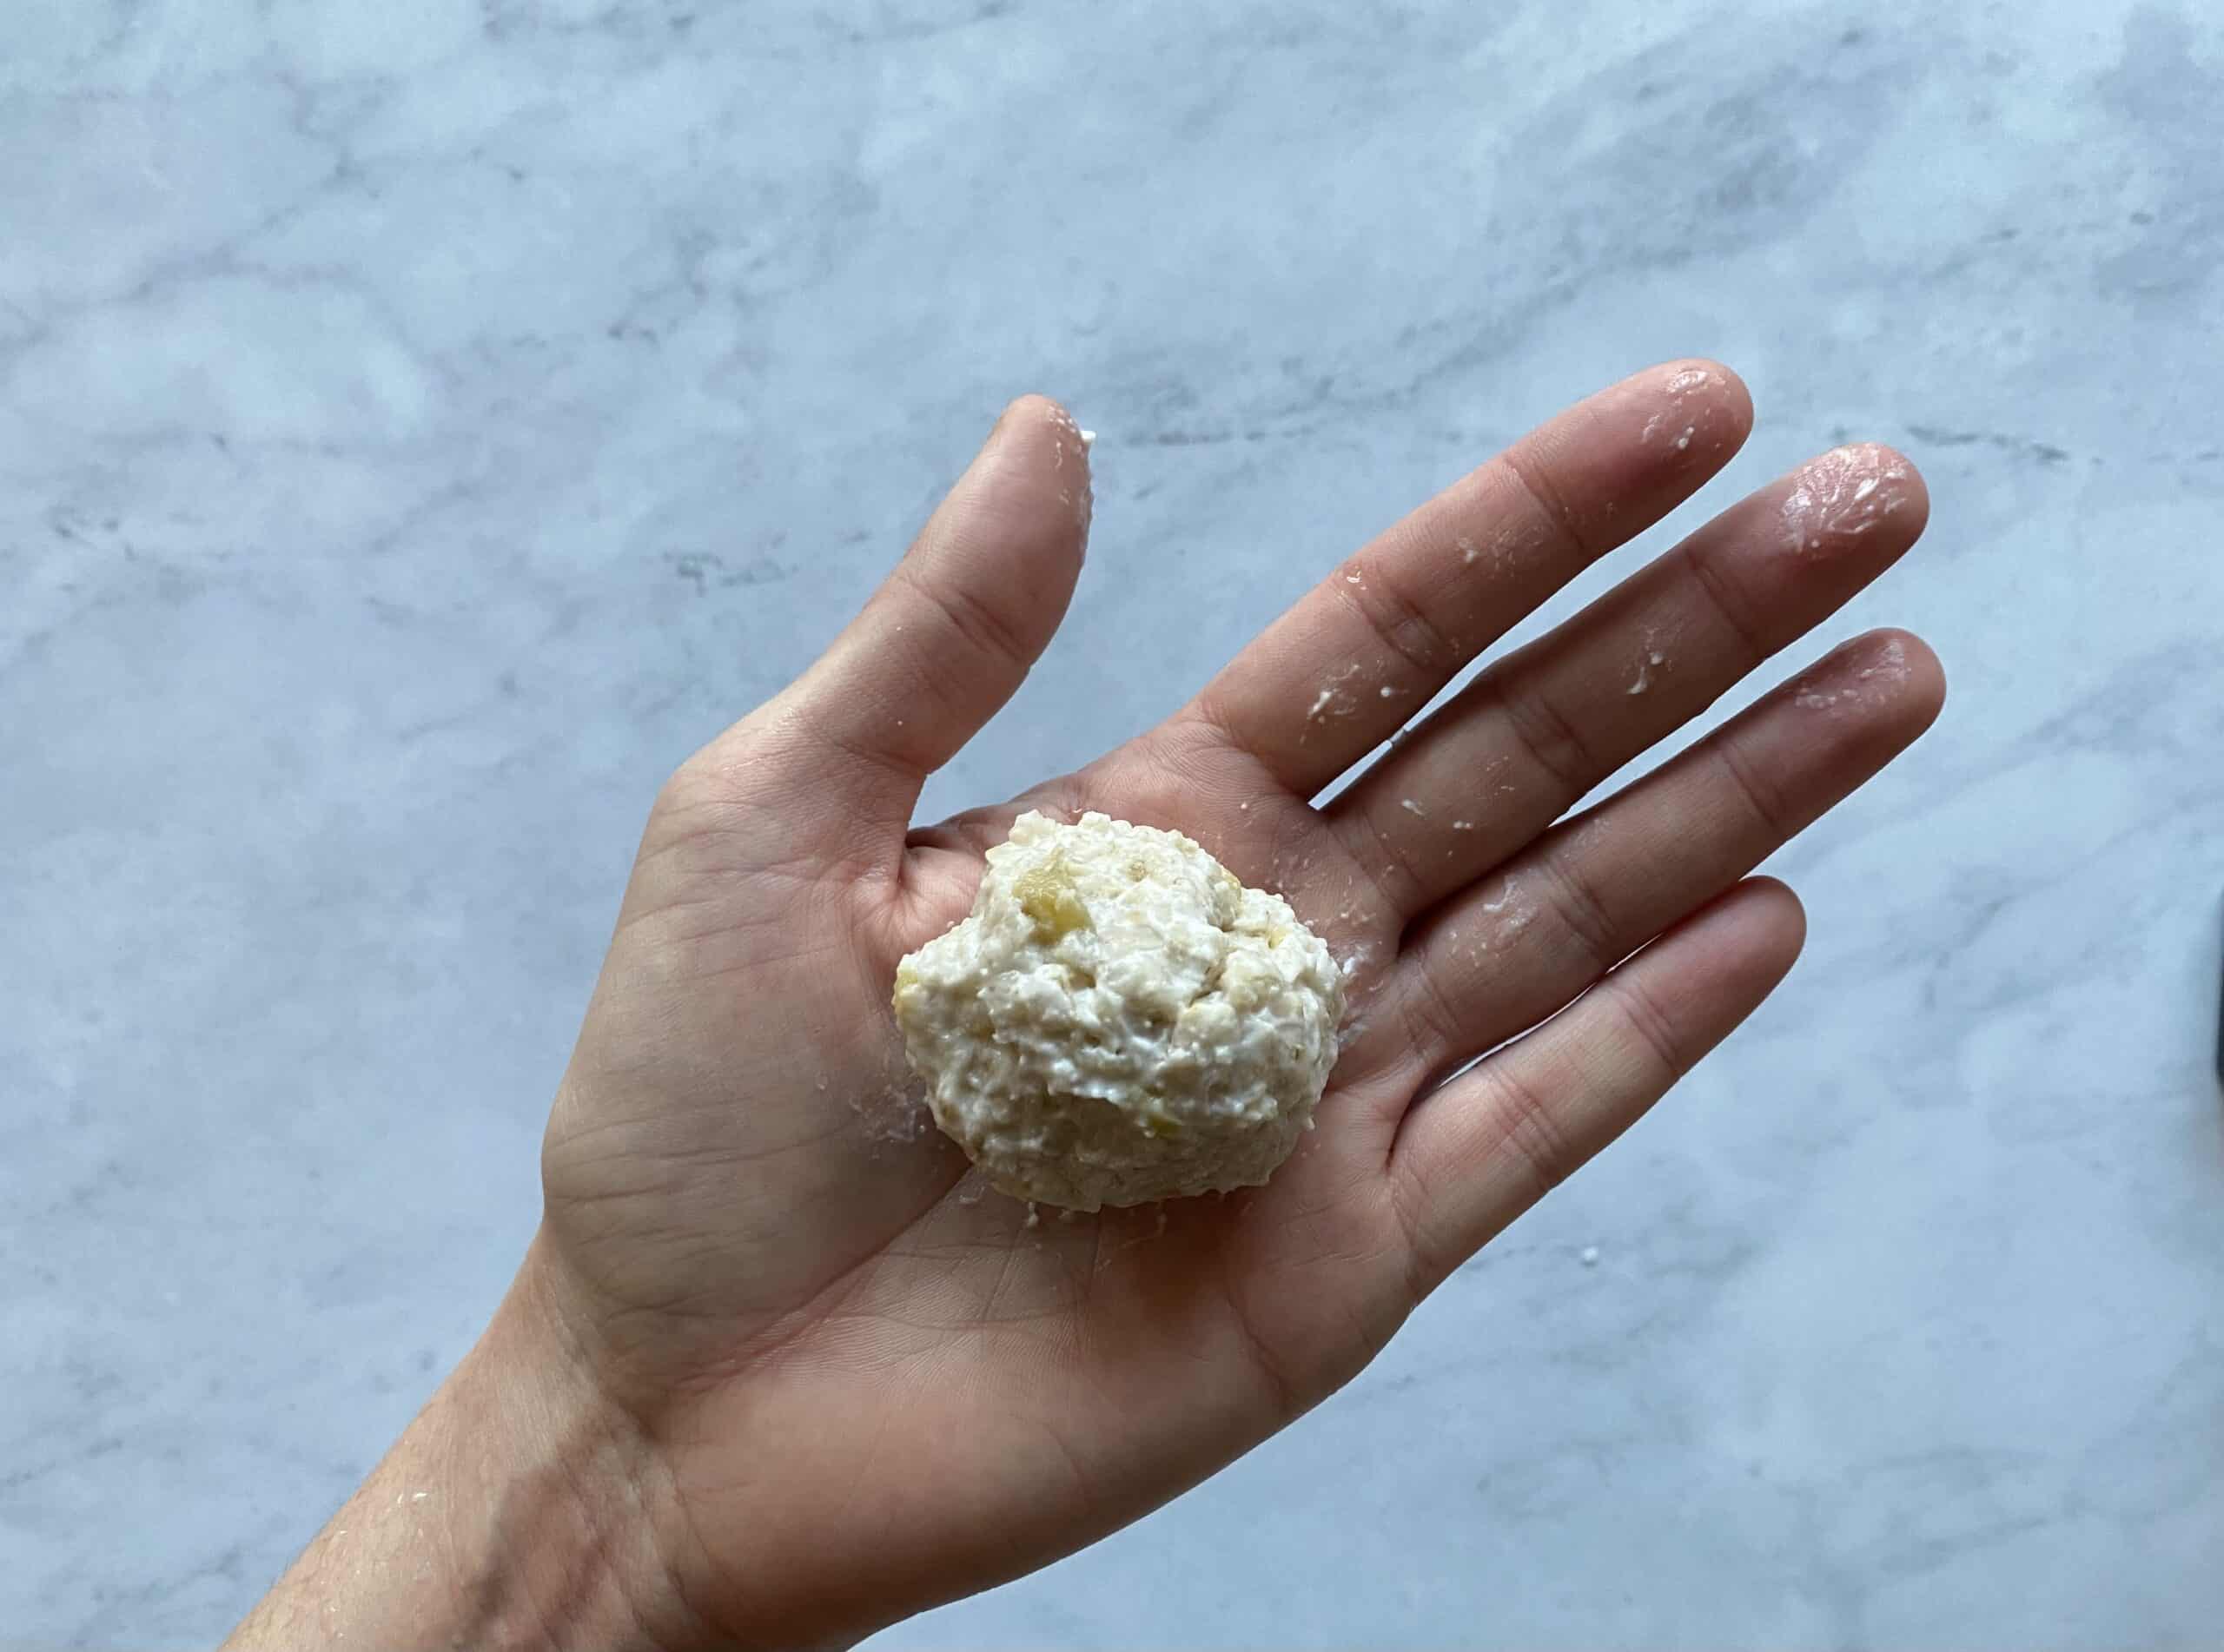 a hand holding some oatmeal pressed into a ball for babies 6 mos+